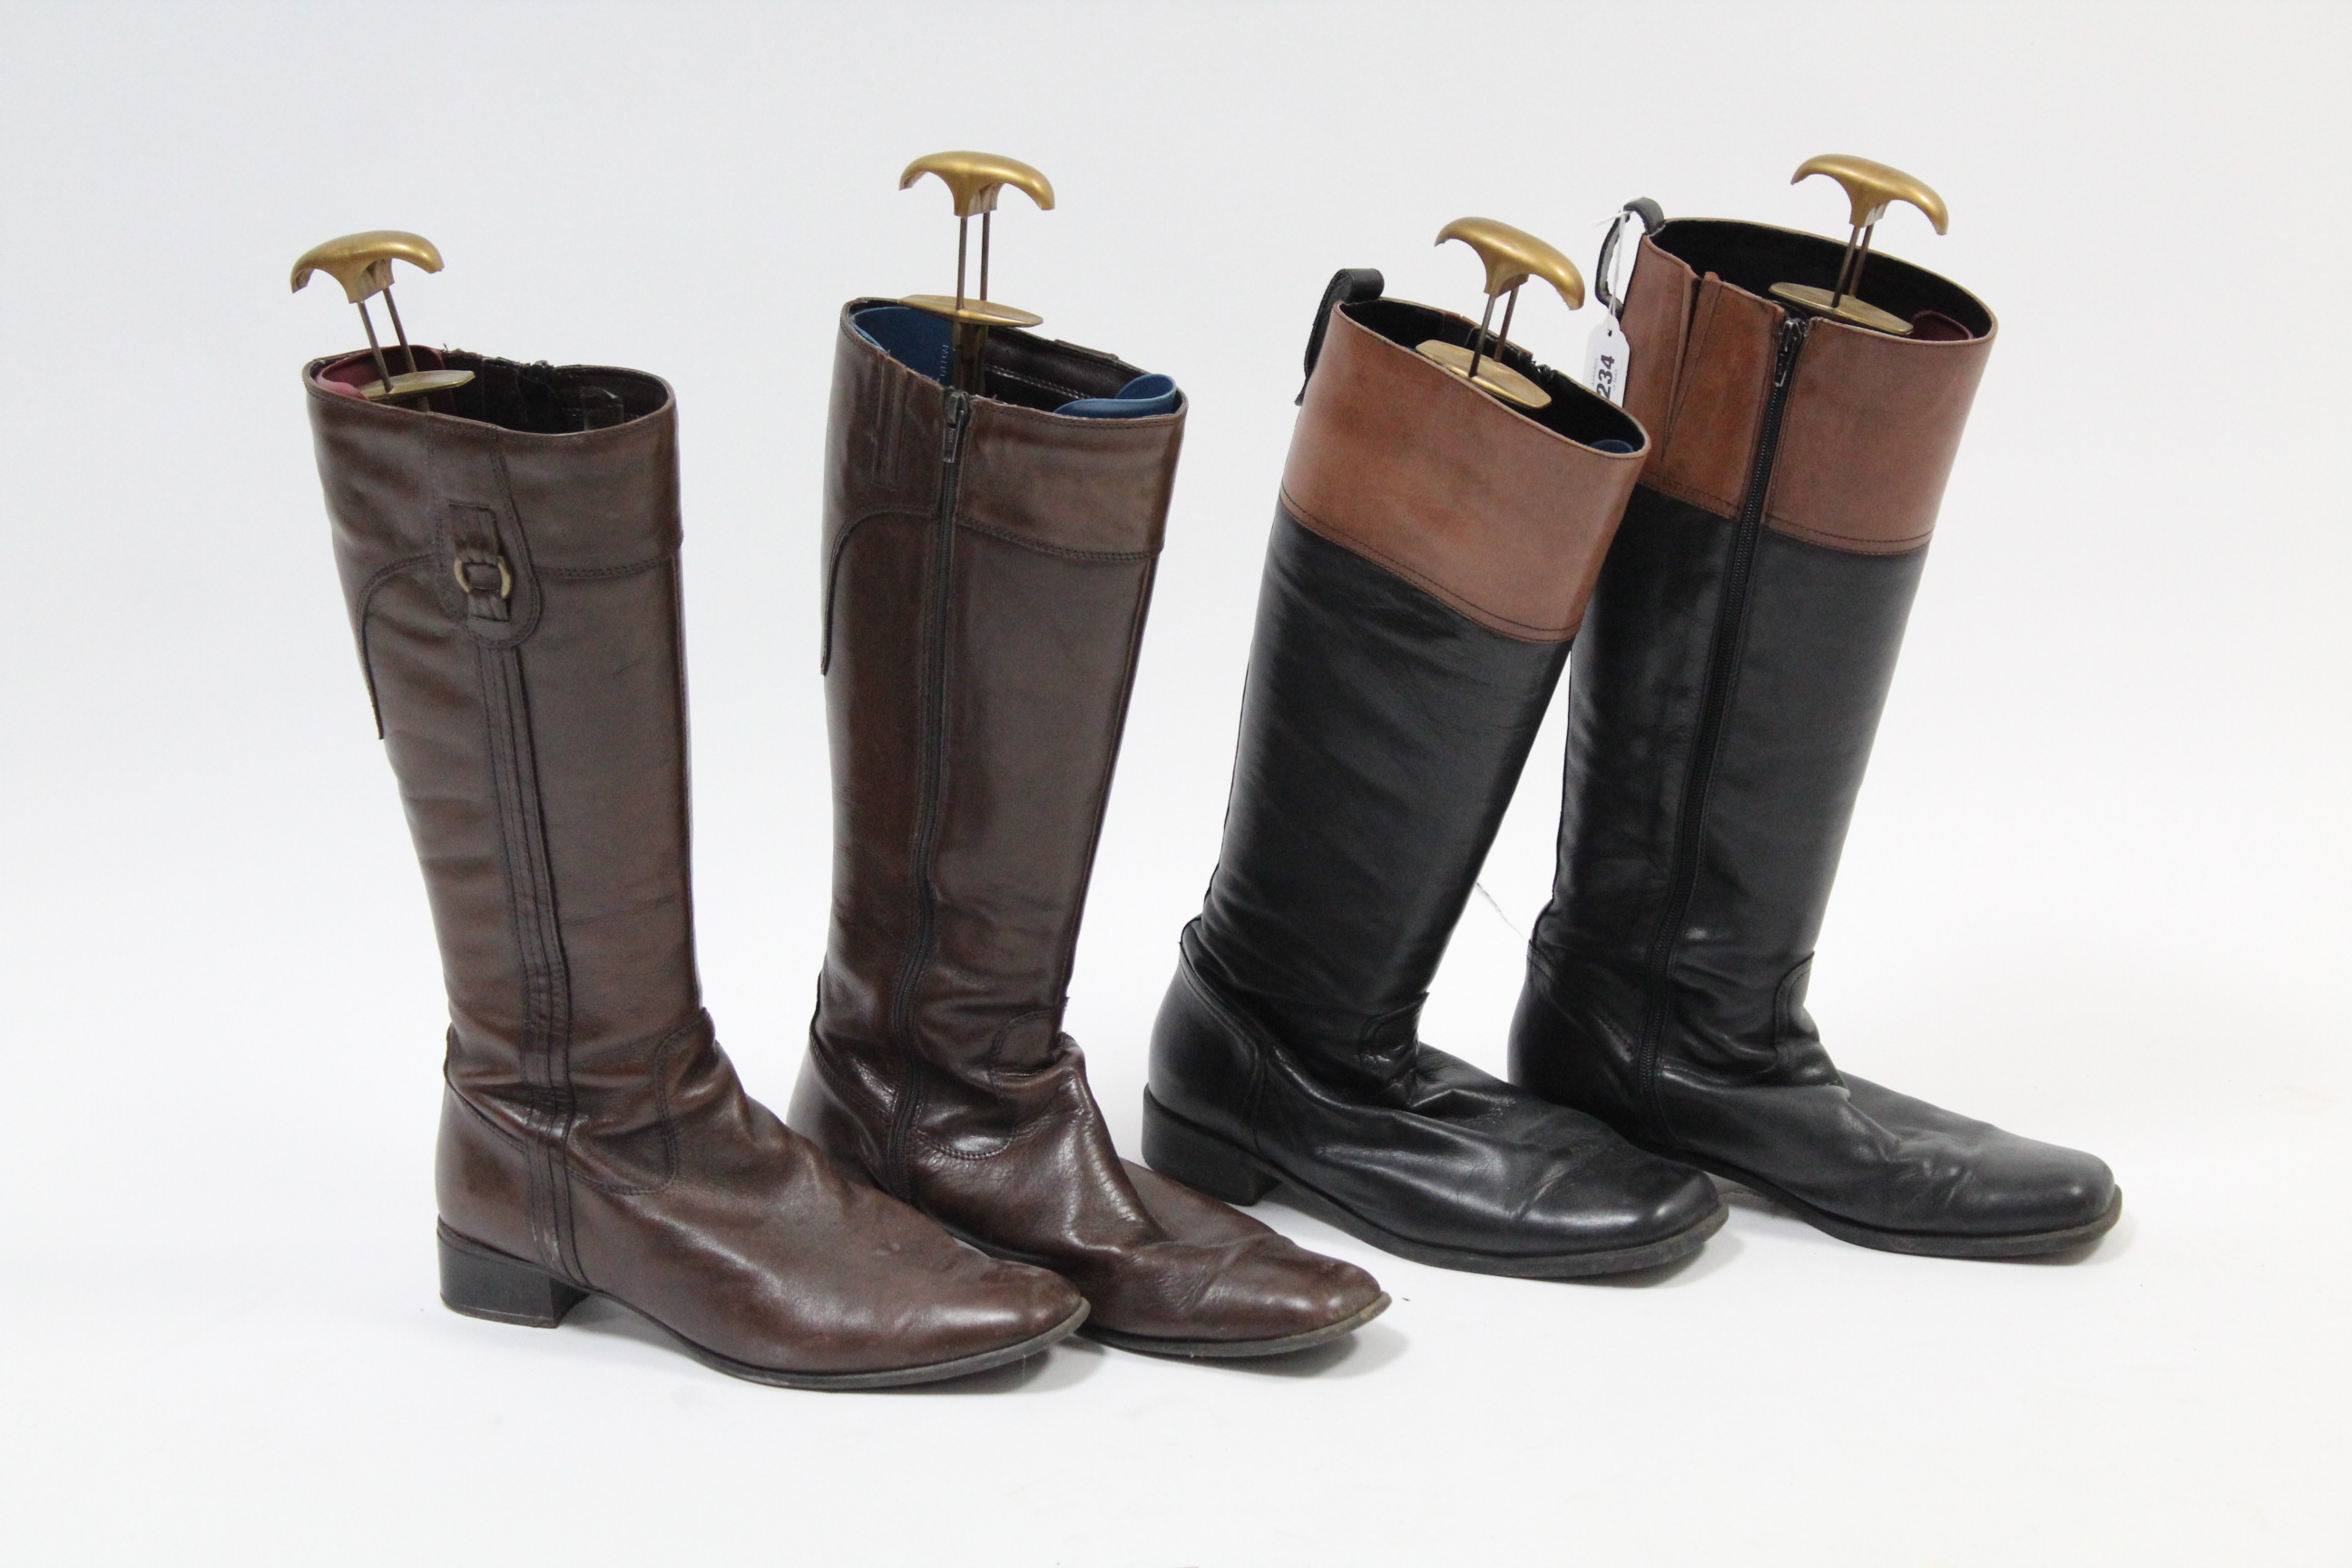 Two modern pairs of ladies leather riding boots, with trees.